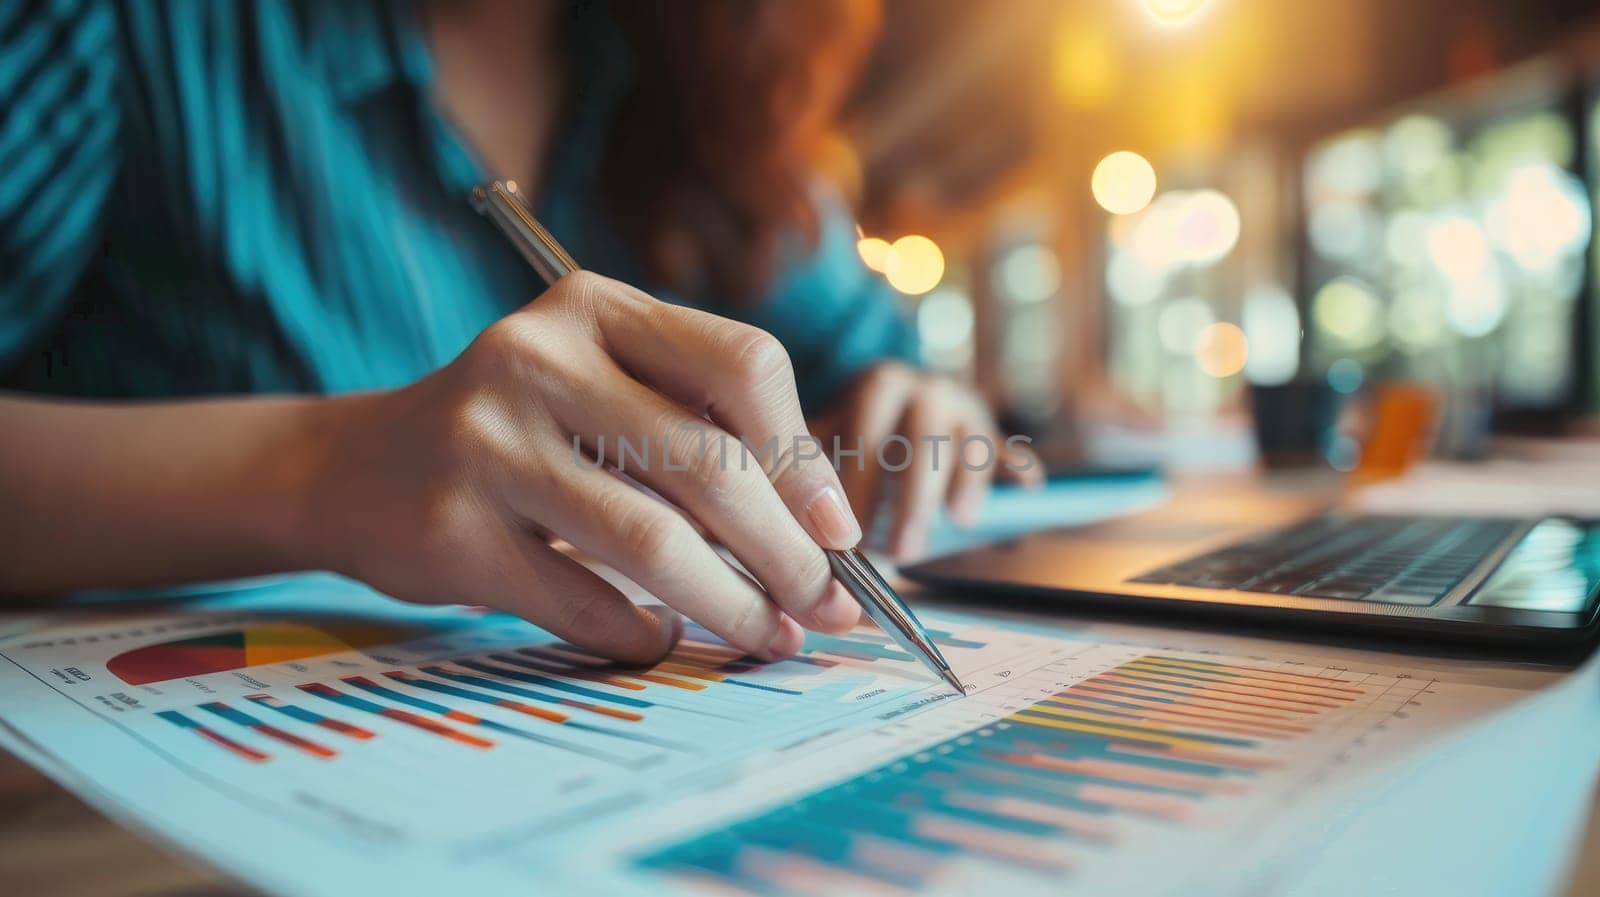 Hands of businesswoman examining graph at desk, Financial advisor and accounting concept.